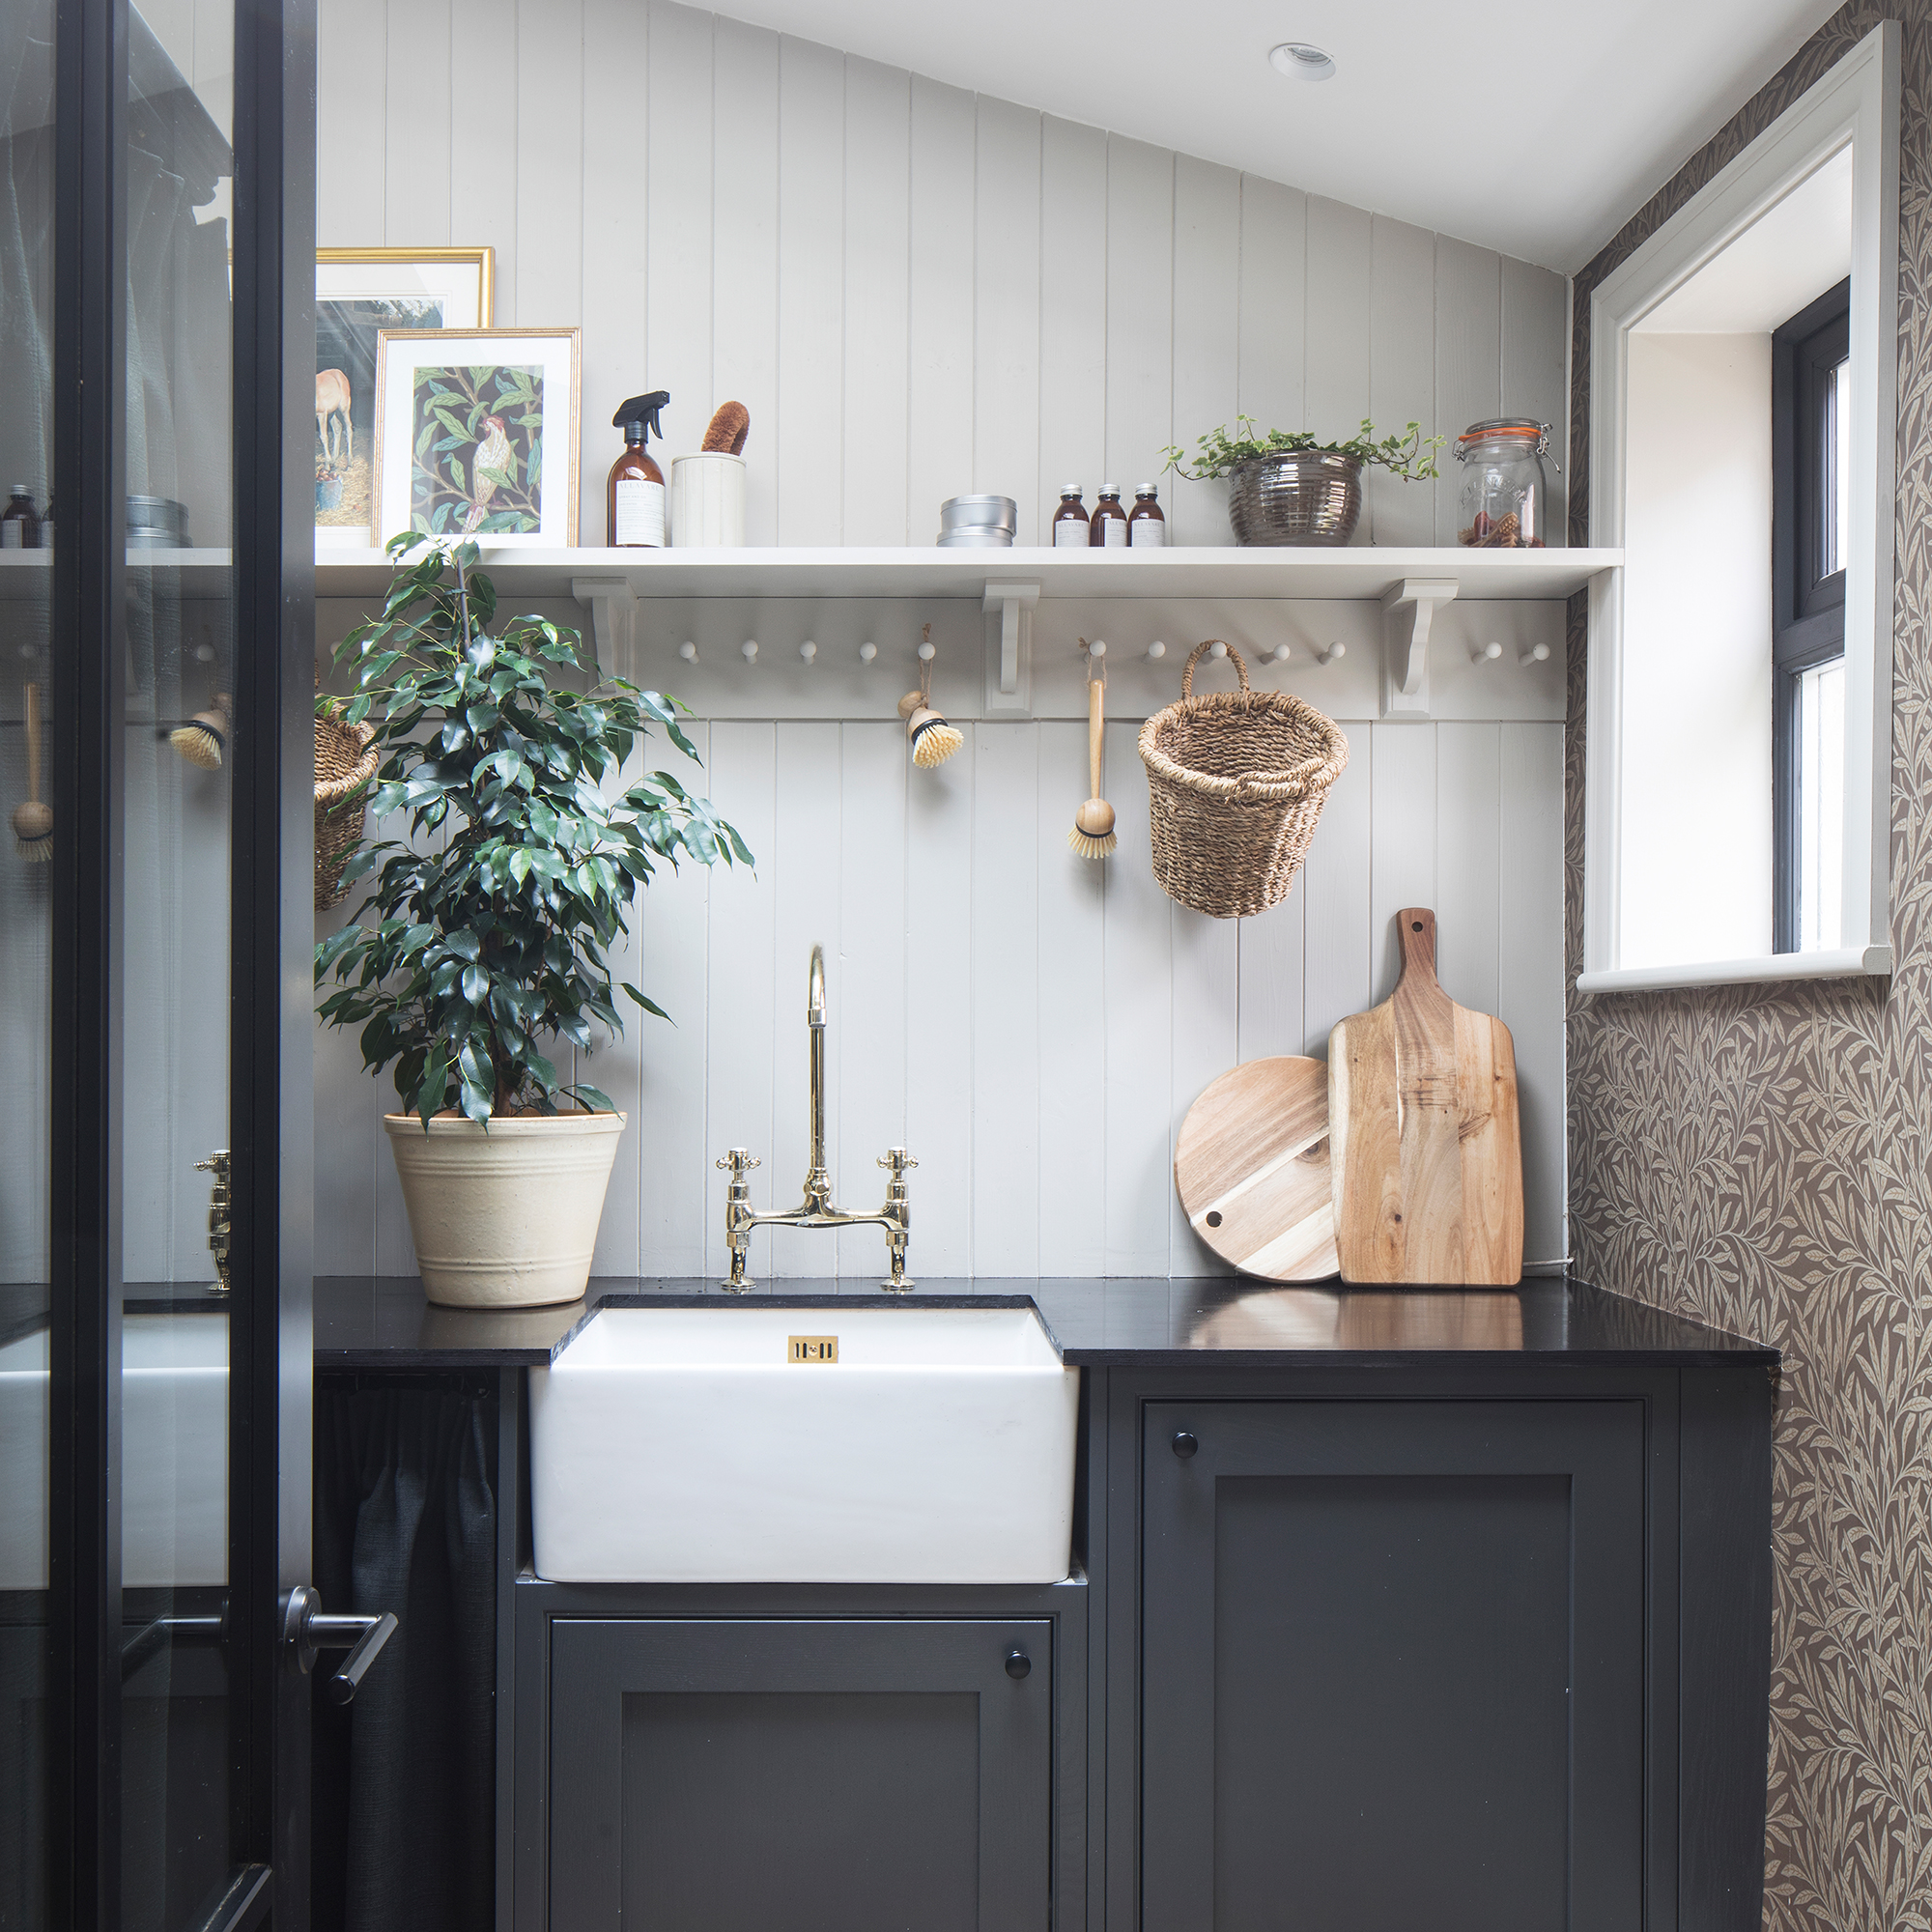 Utility room with dark grey cabinetry, wall panelling and wallpaper